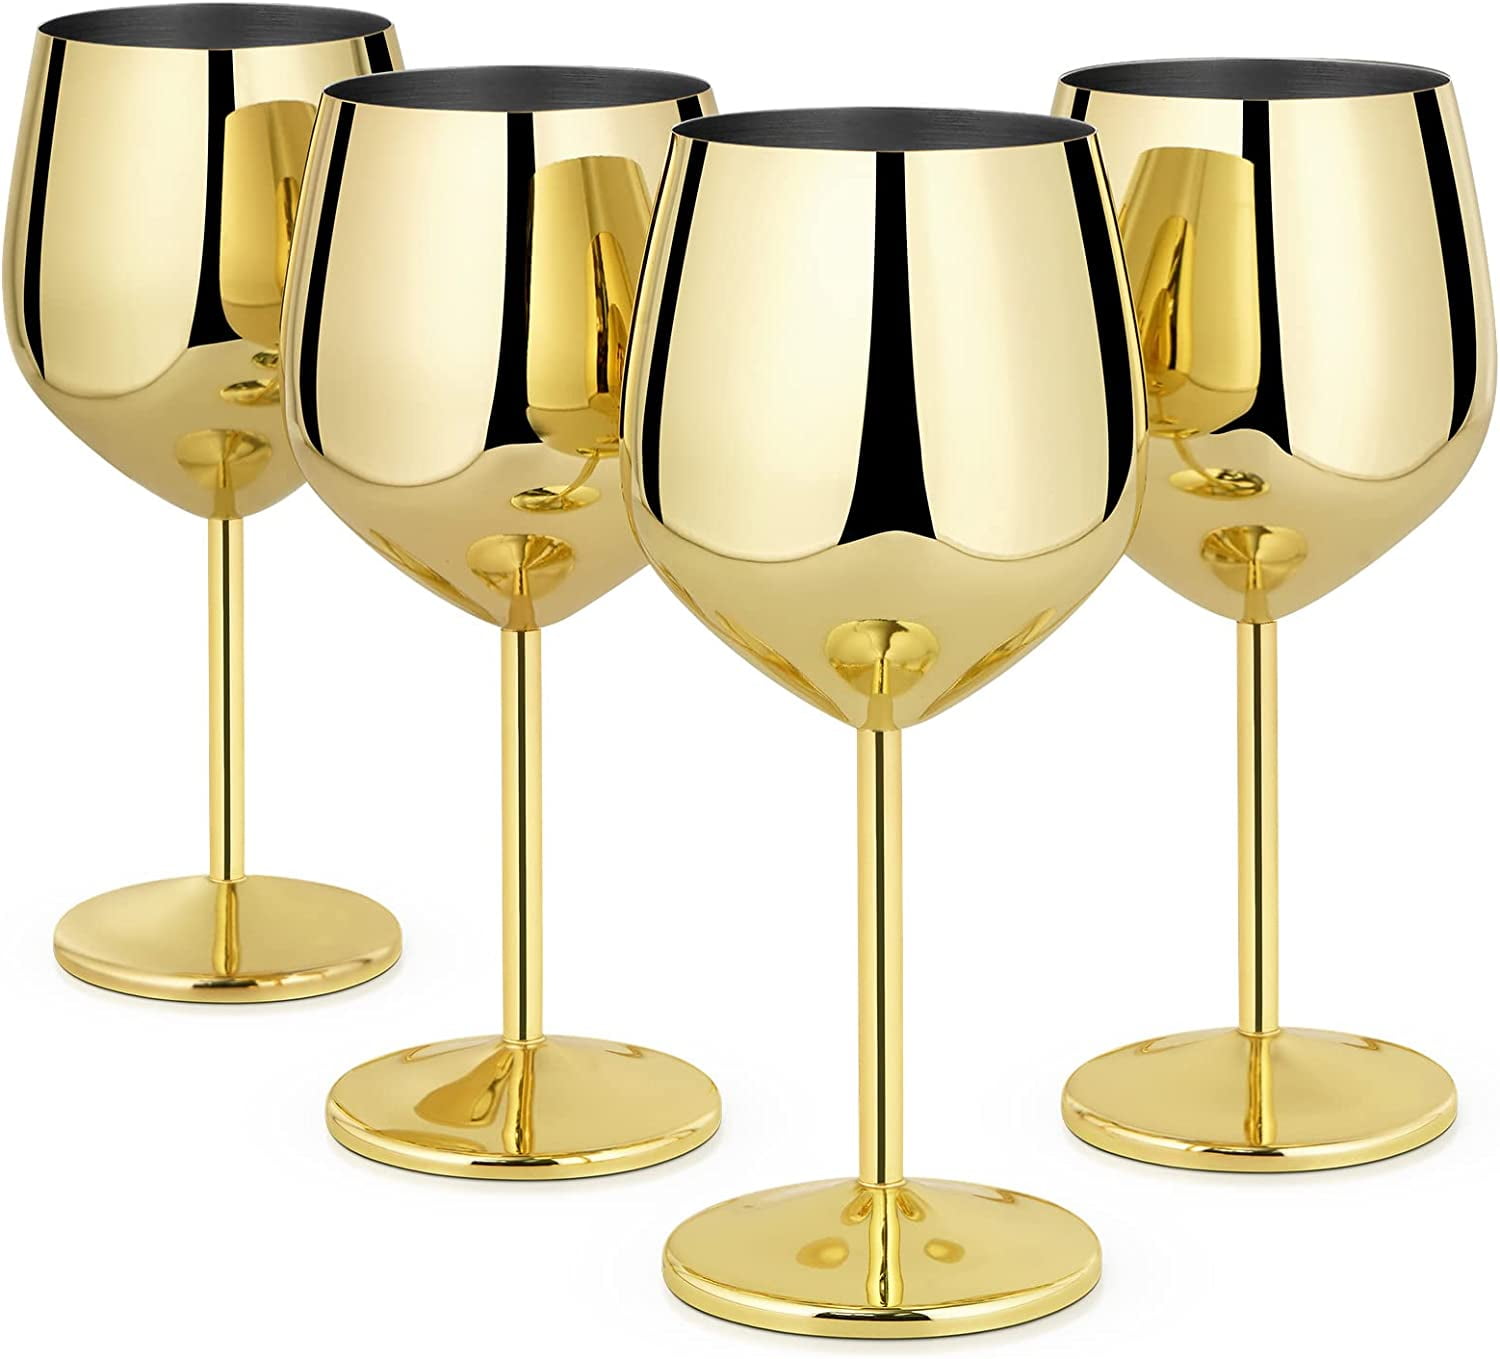 Noble and light luxury golden glass wine glasses smooth and delicate  champagne glasses home hotel club banquet table durable - AliExpress